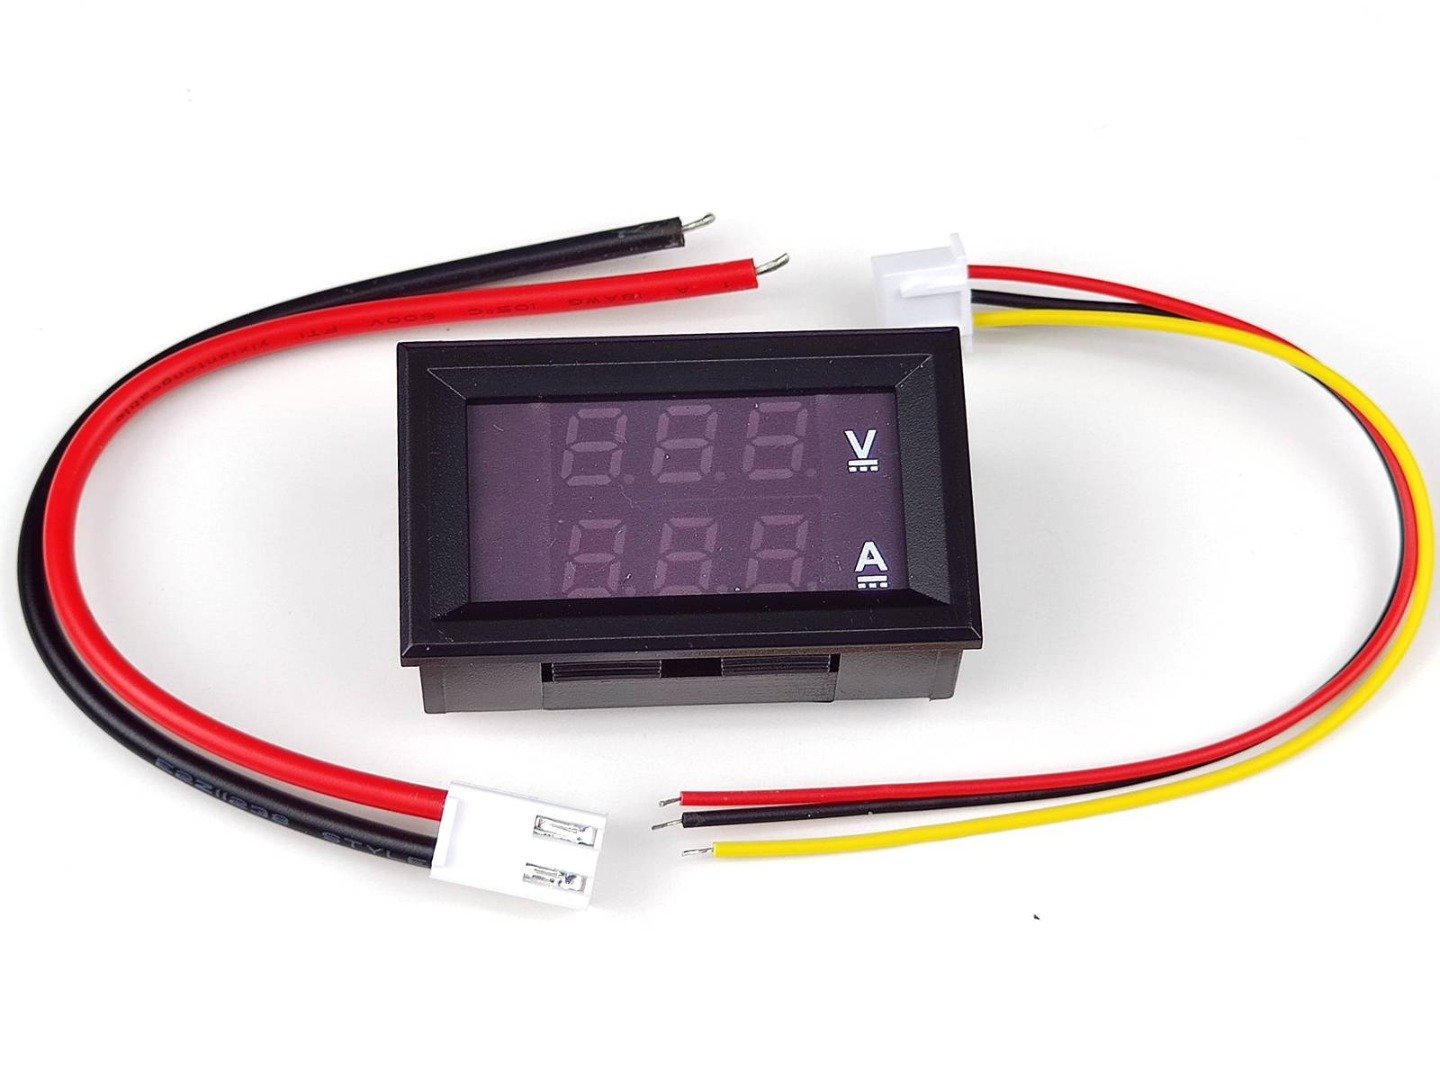 LED Voltmeter Ammeter Dual Display 100VDC 10A – Front Panel Snap-In 4